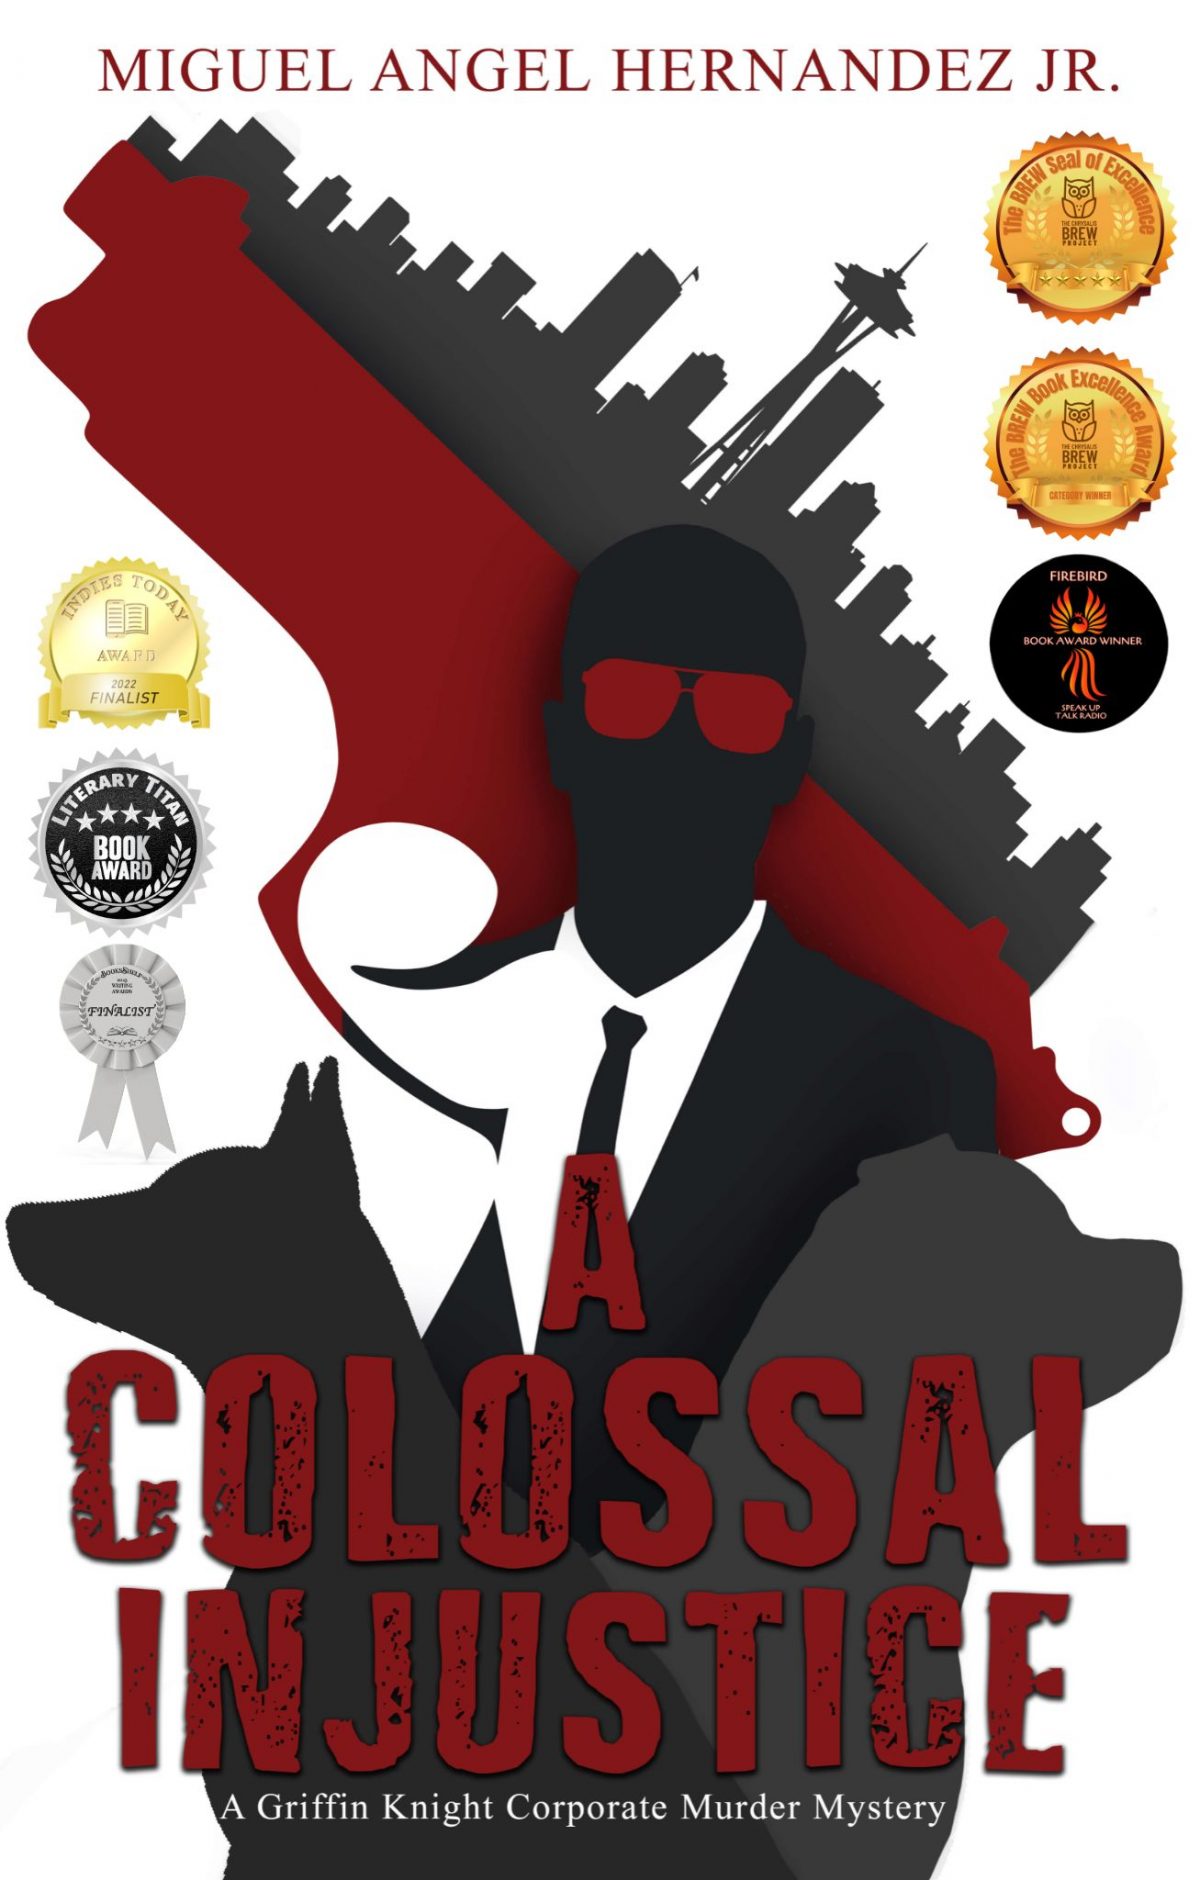 A Colossal Injustice – Murder Mystery